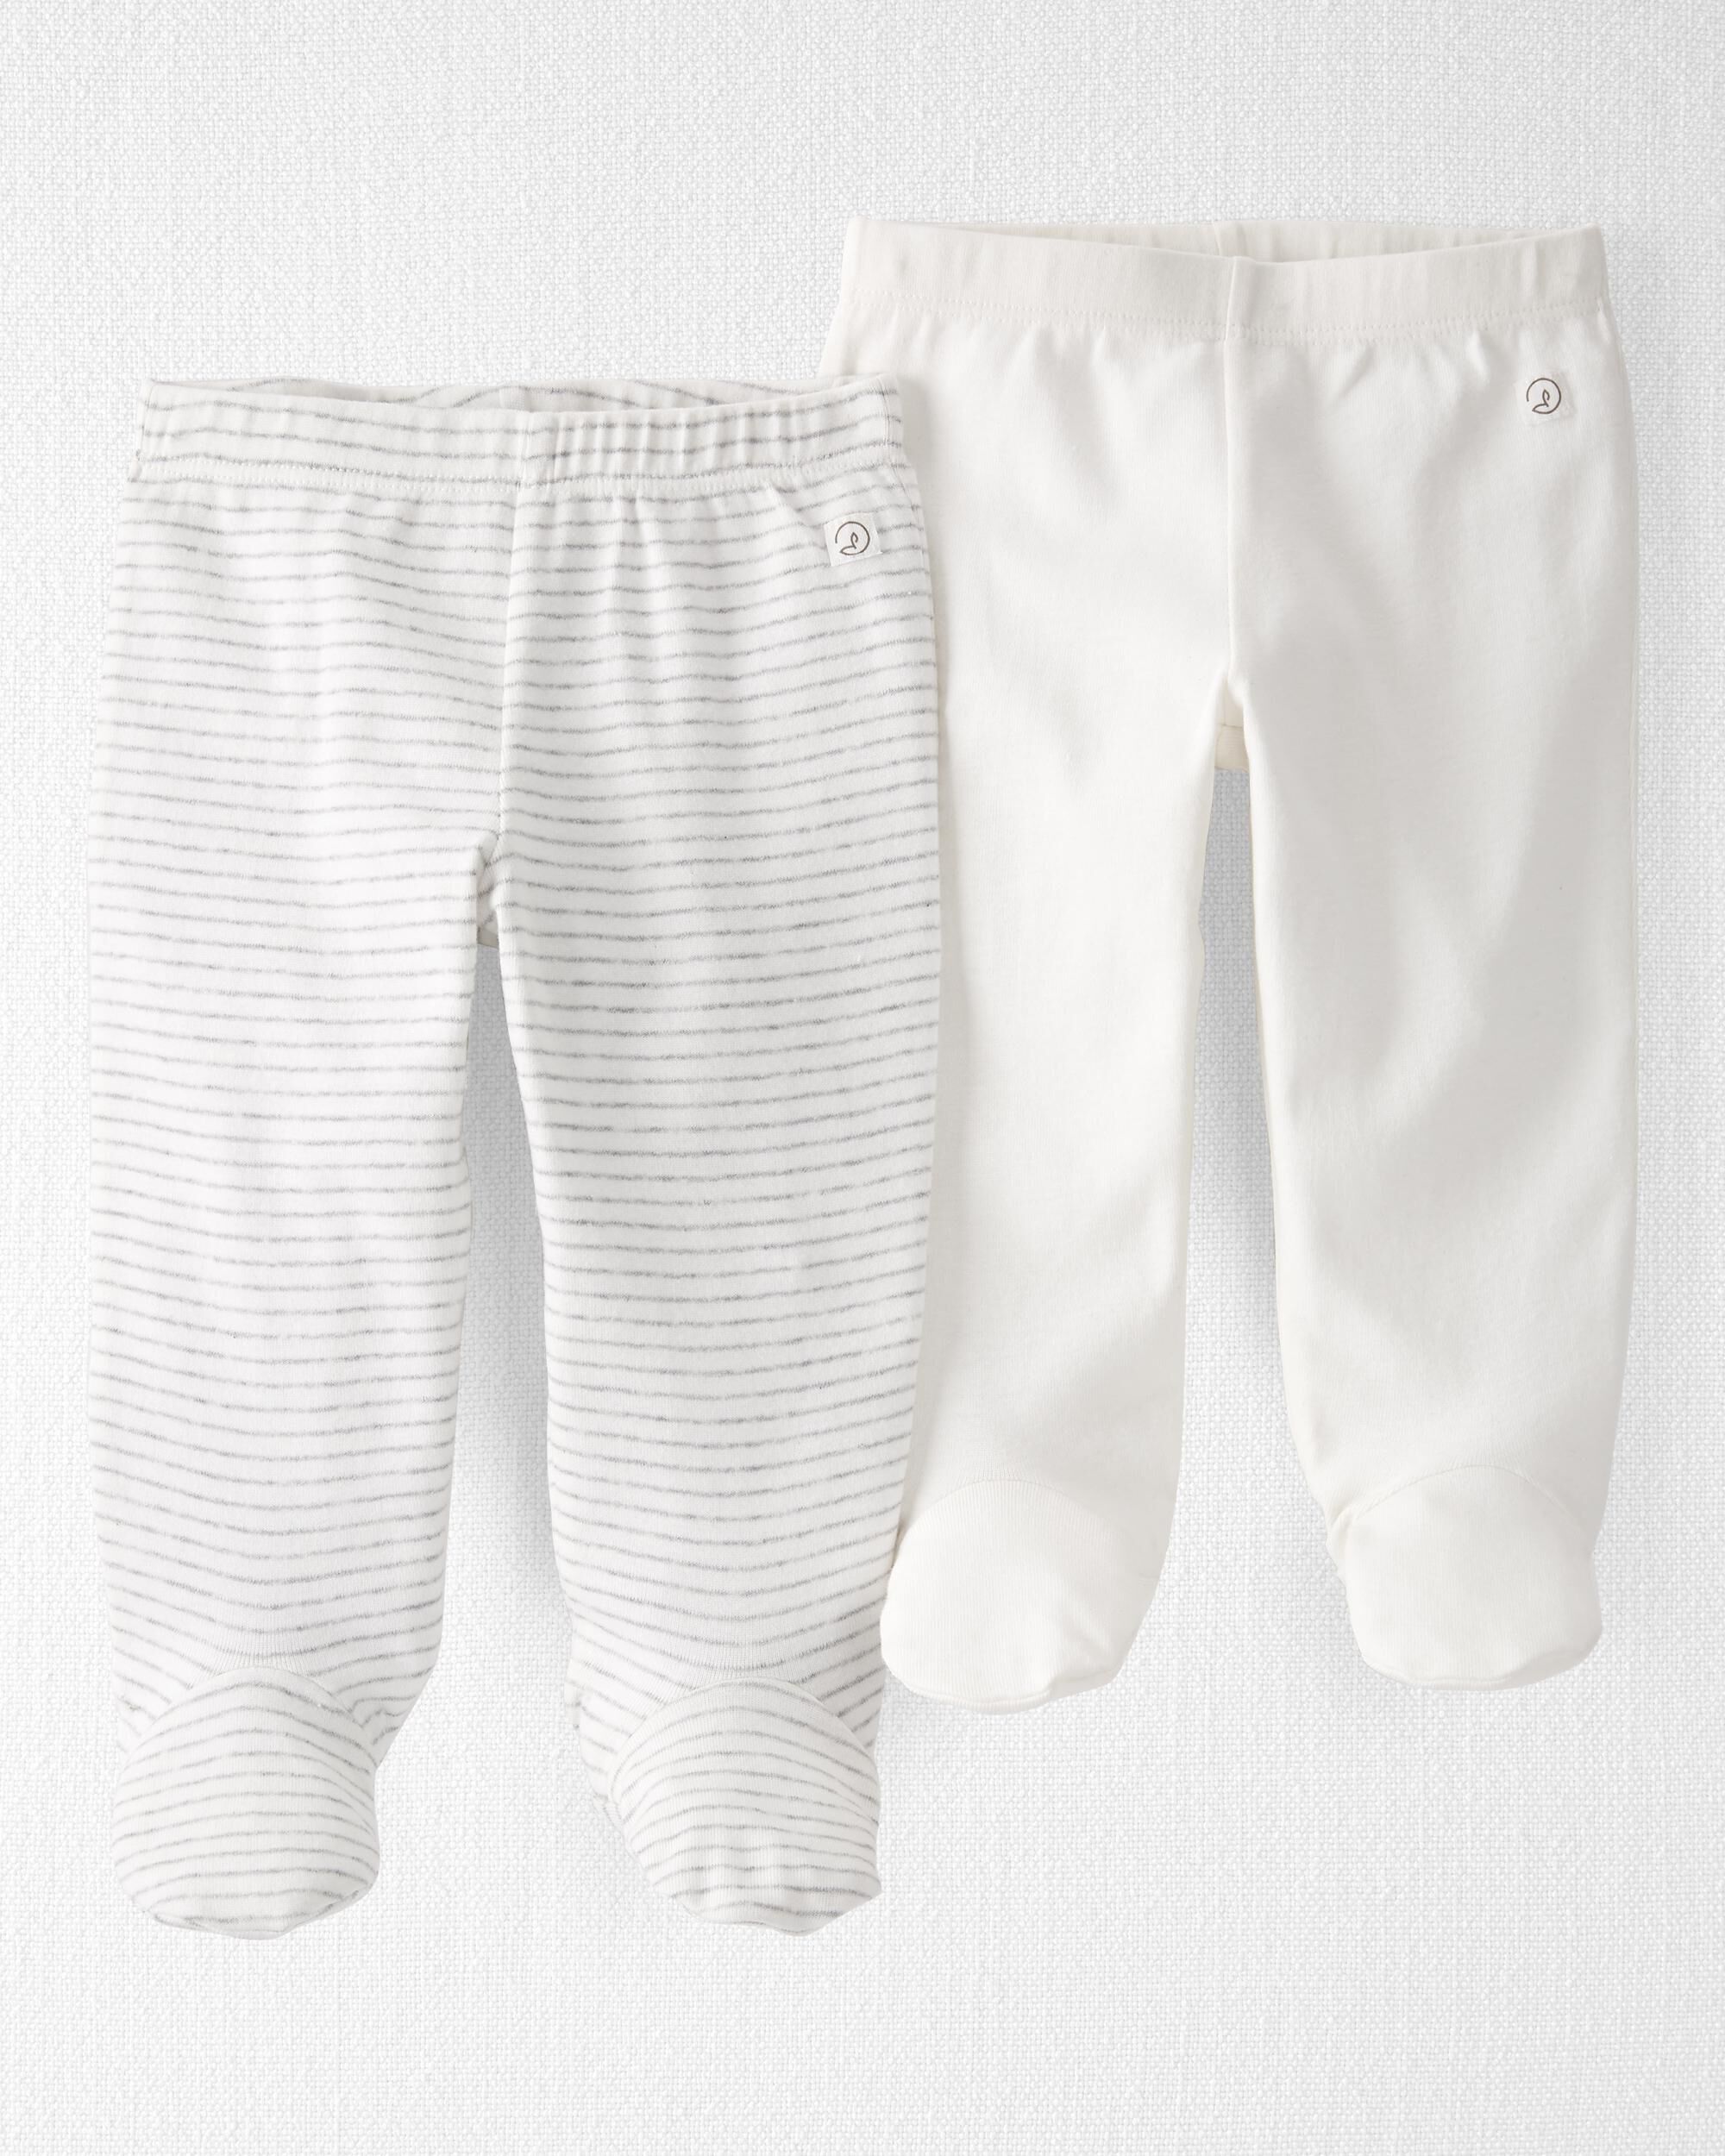 baby pants with feet · Reliefwear · T R I B I E S S